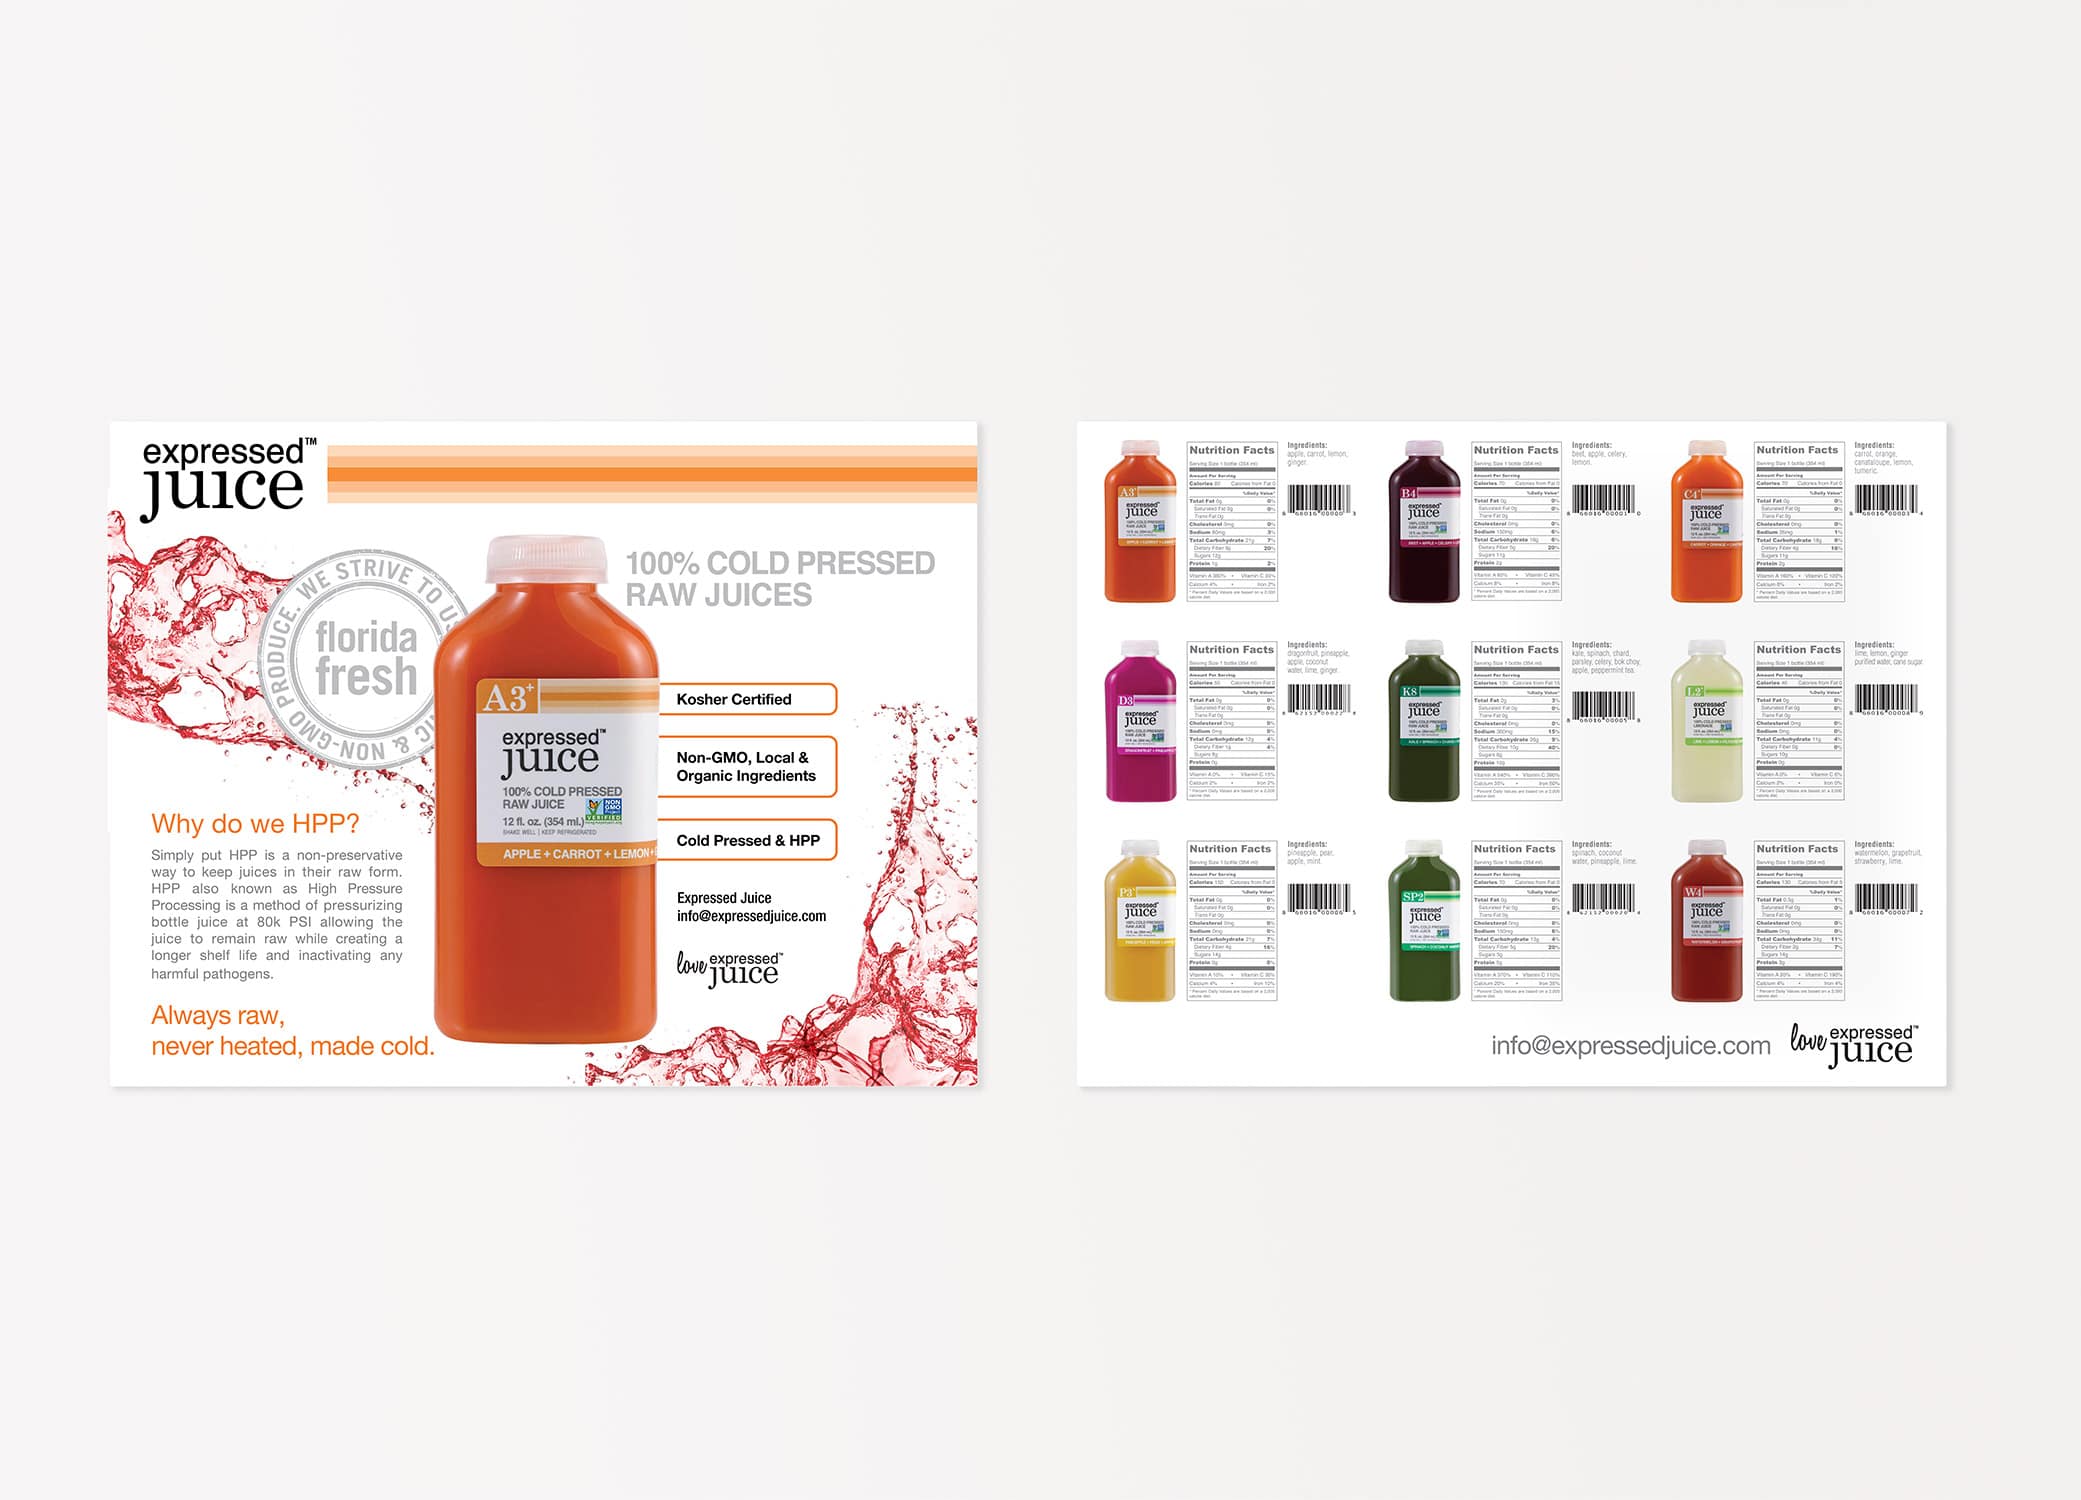 Expressed Juice sell sheets showcasing the value of their cold pressed juices, information about different flavors and nutrition benefits.